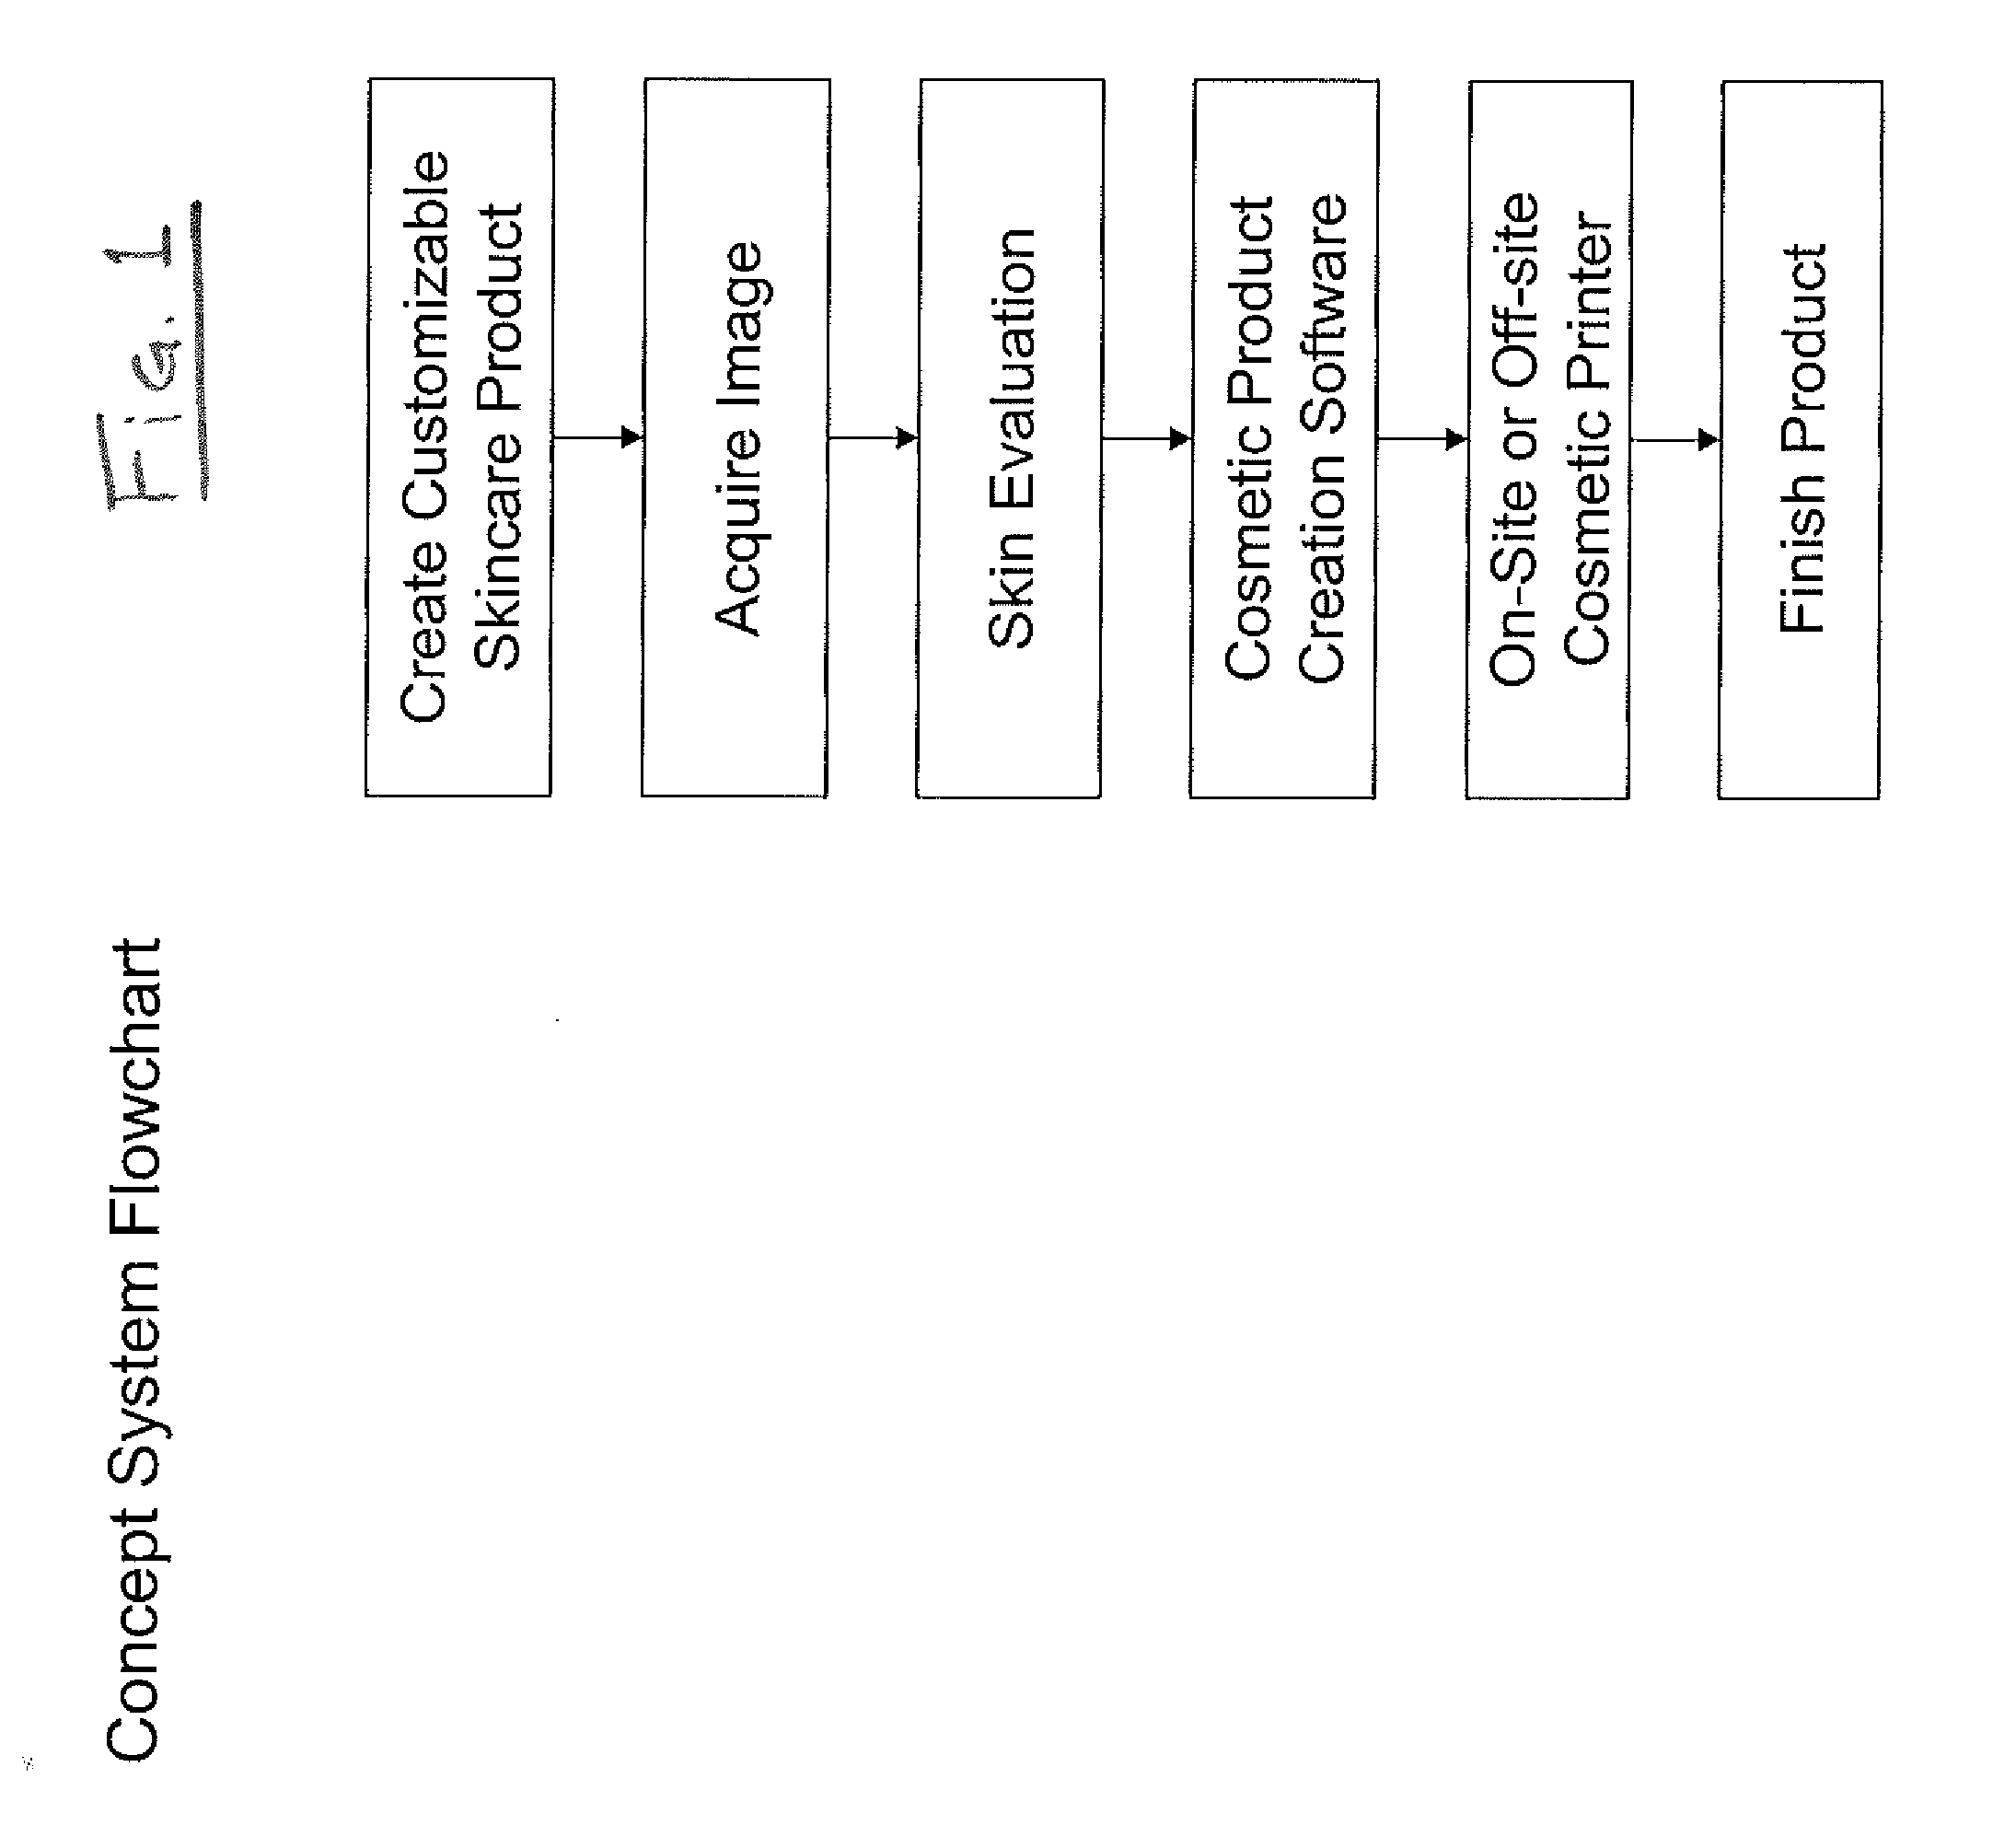 Method and System For Automatic or Manual Evaluation to Provide Targeted and Individualized Delivery of Cosmetic Actives in a Mask or Patch Form